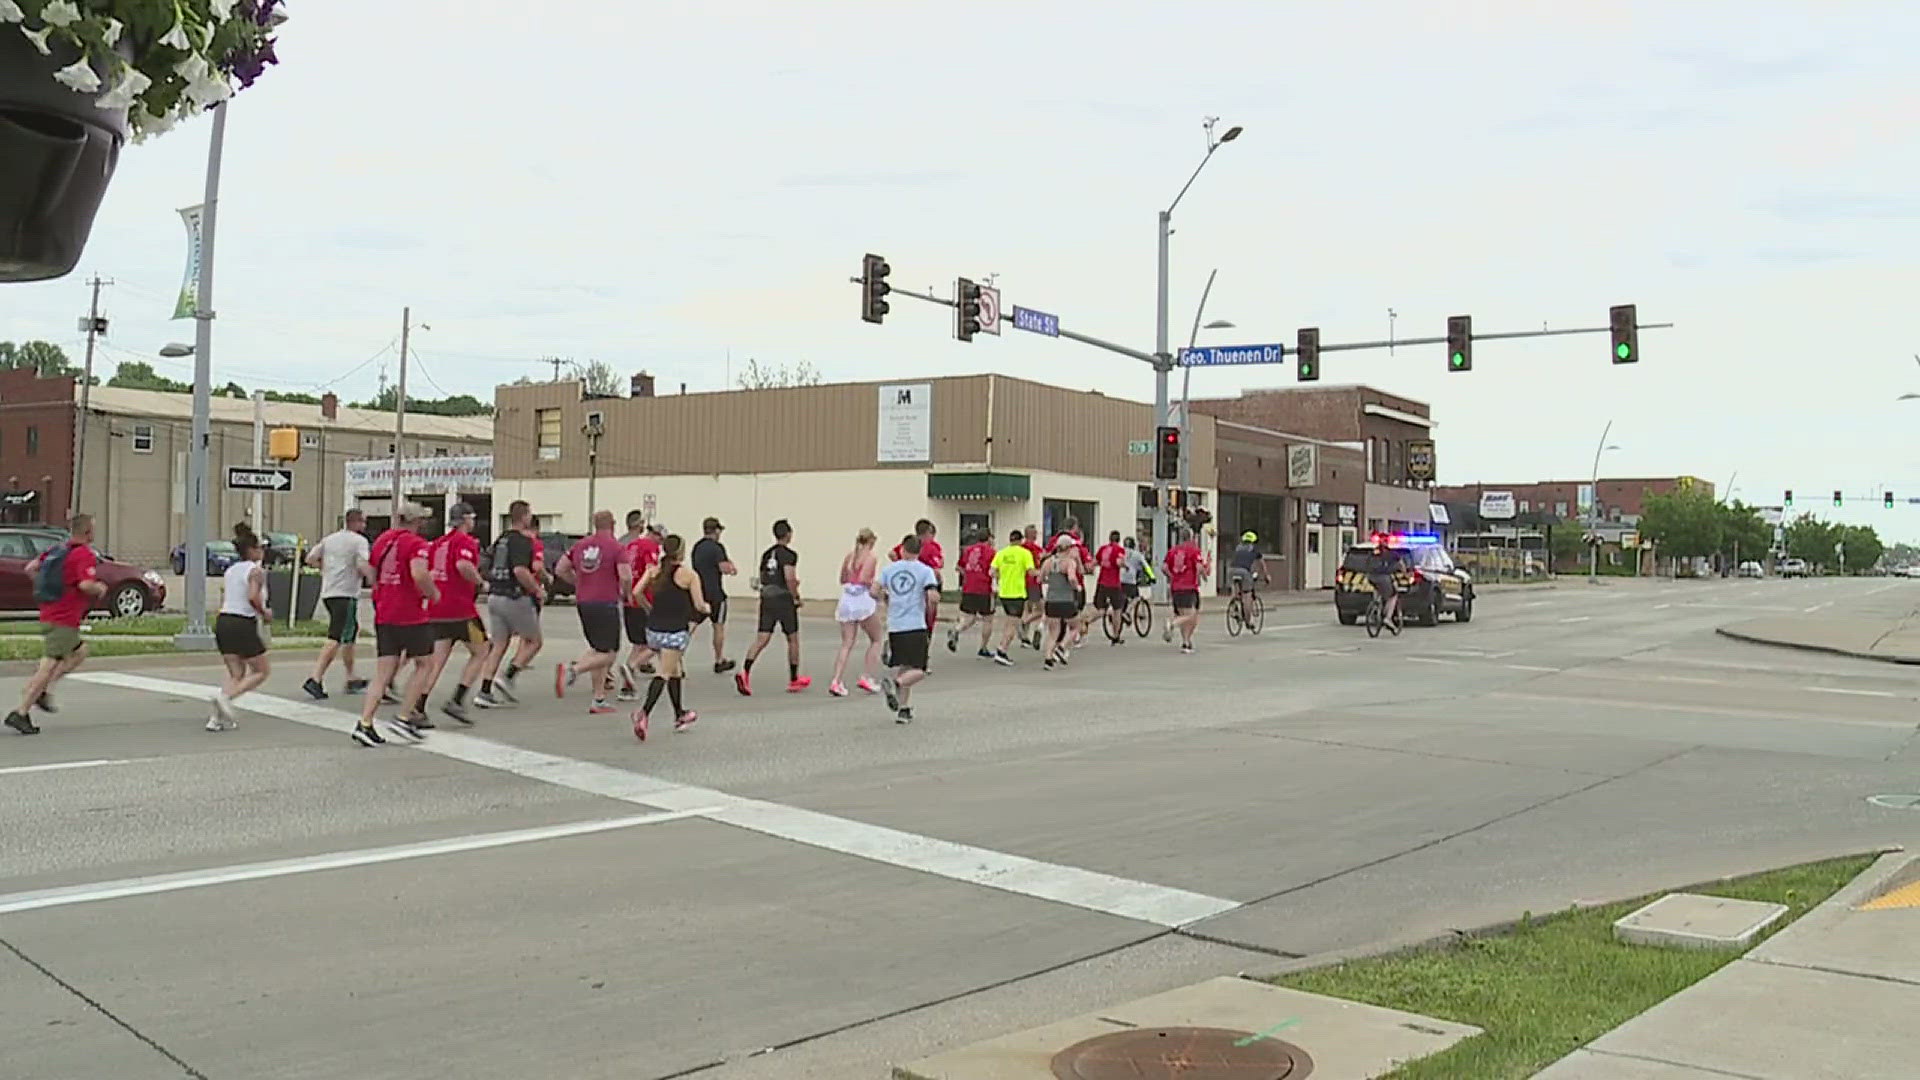 25 officers carried the flame of hope for six miles.